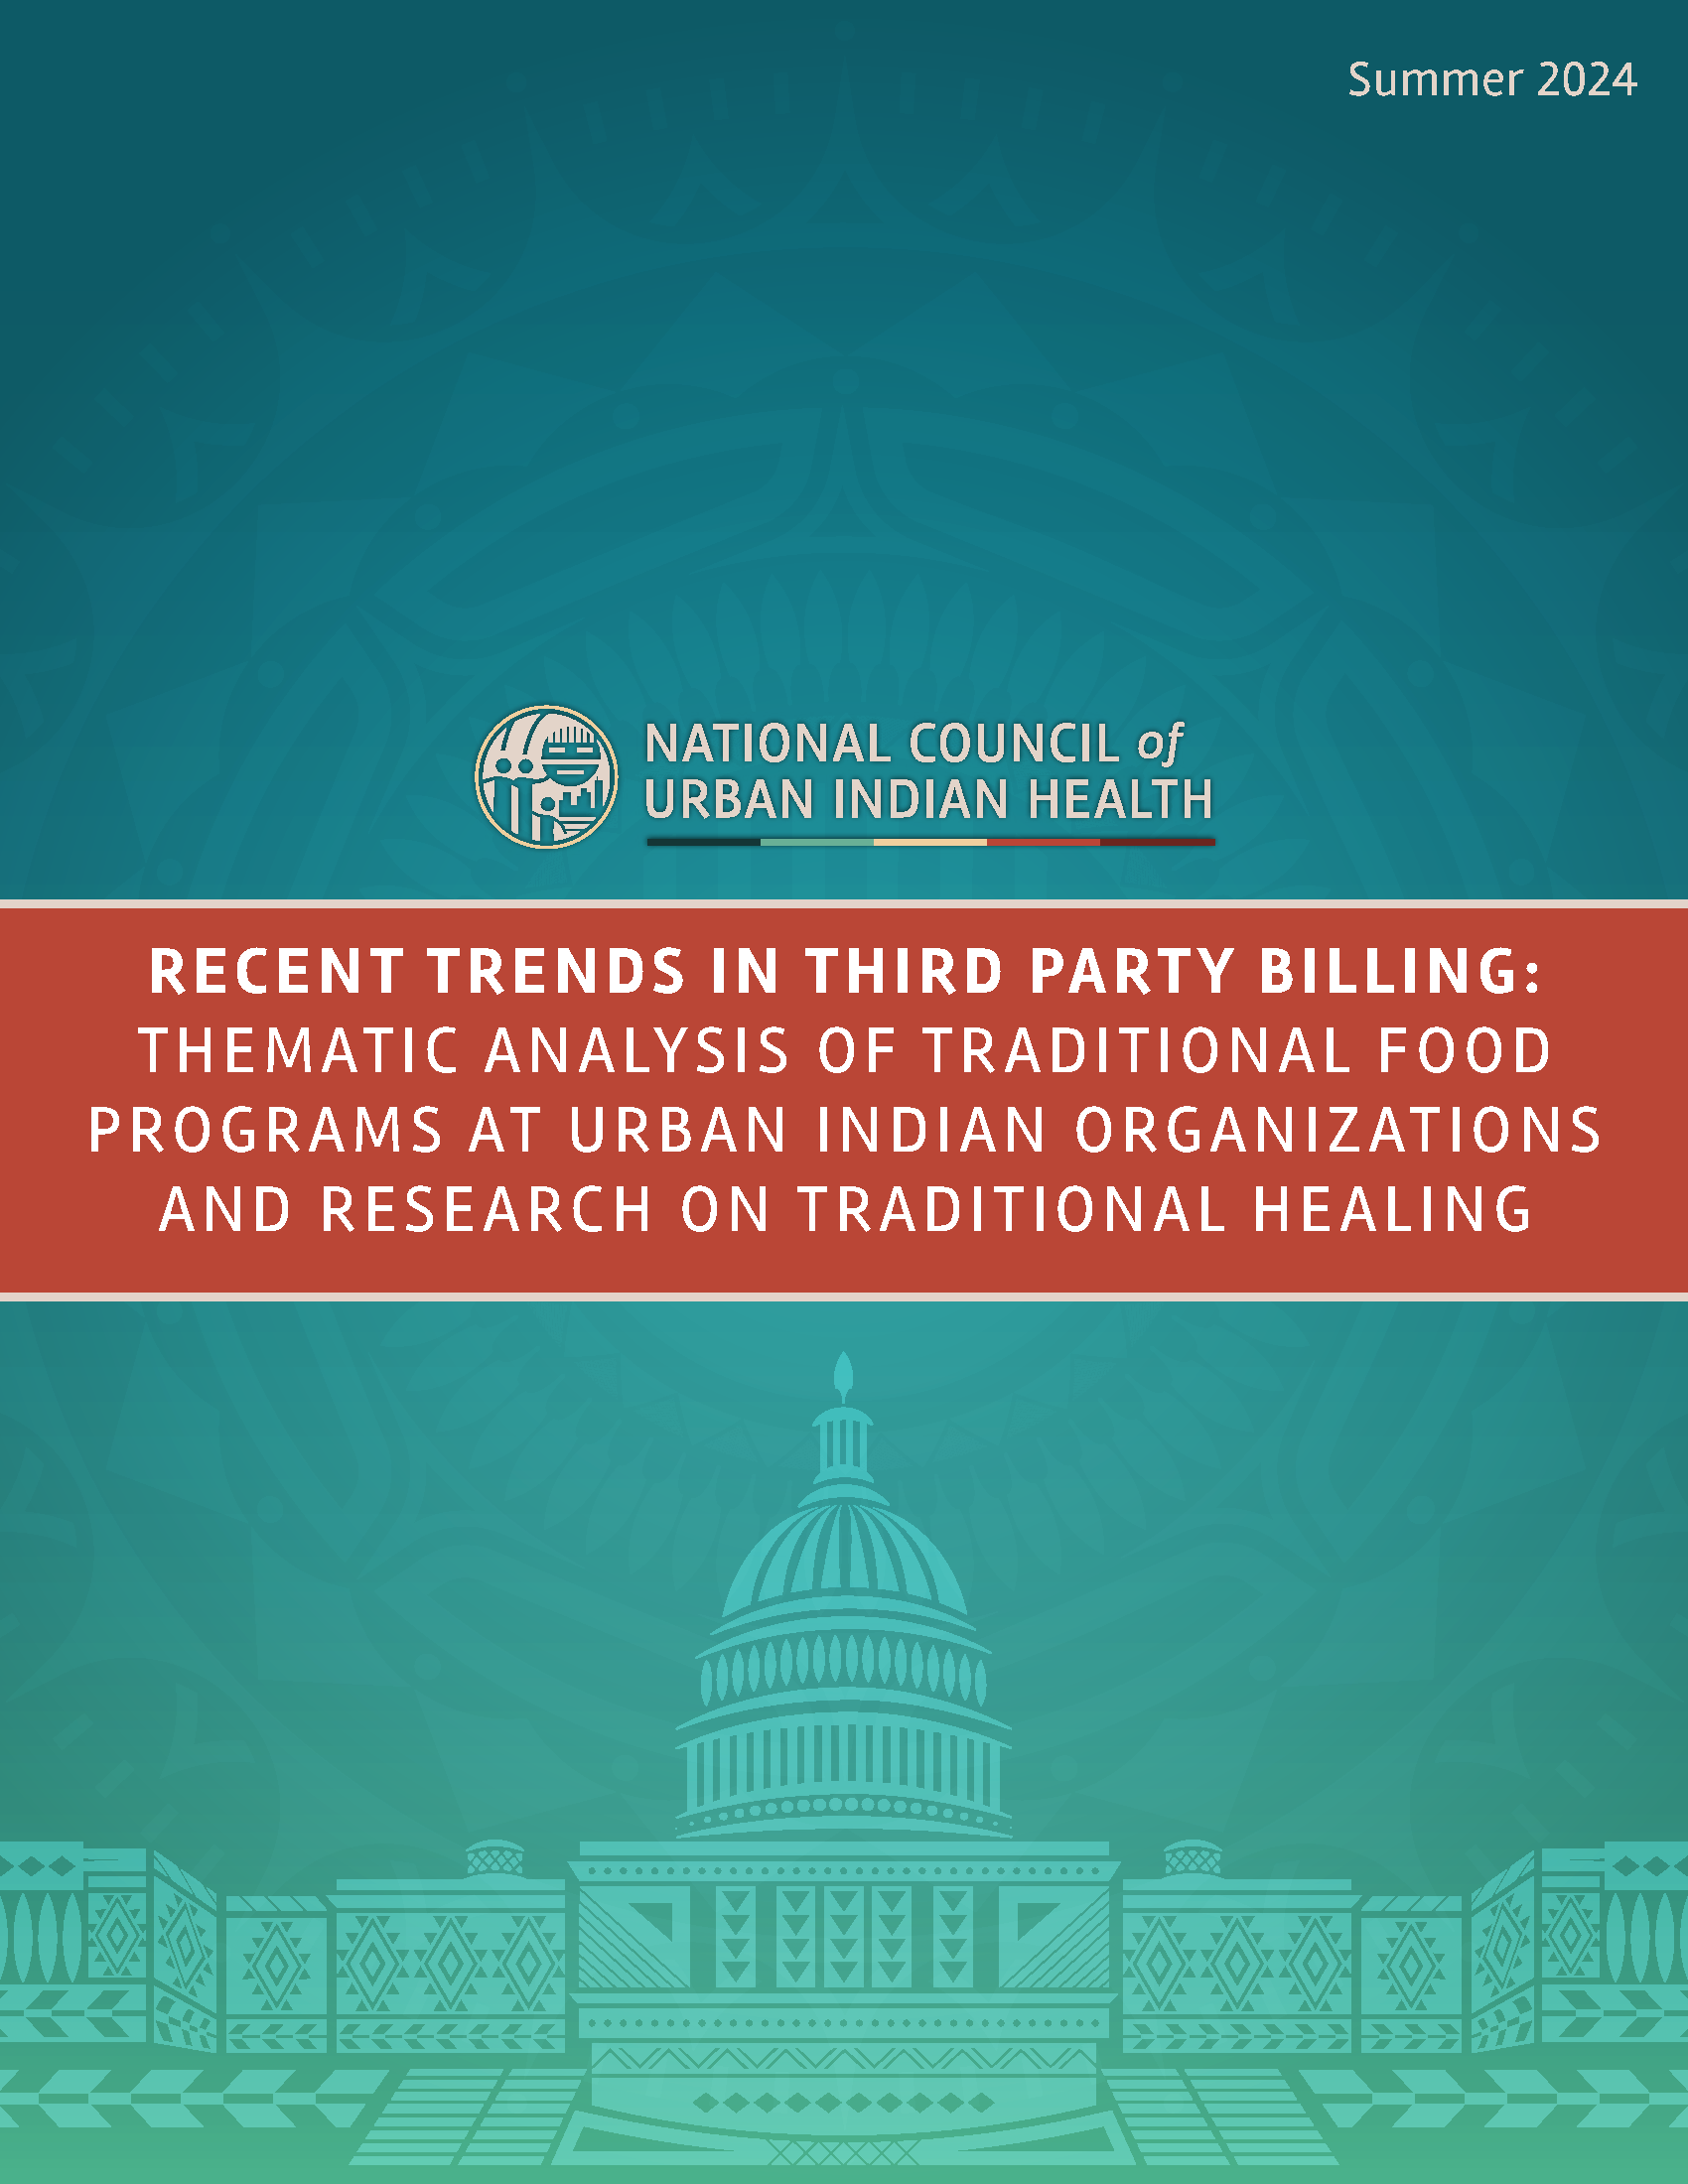 Recent Trends In Third Party Billing: Thematic Analysis of Traditional Food Programs at Urban Indian Organizations and Research on Traditional Healing